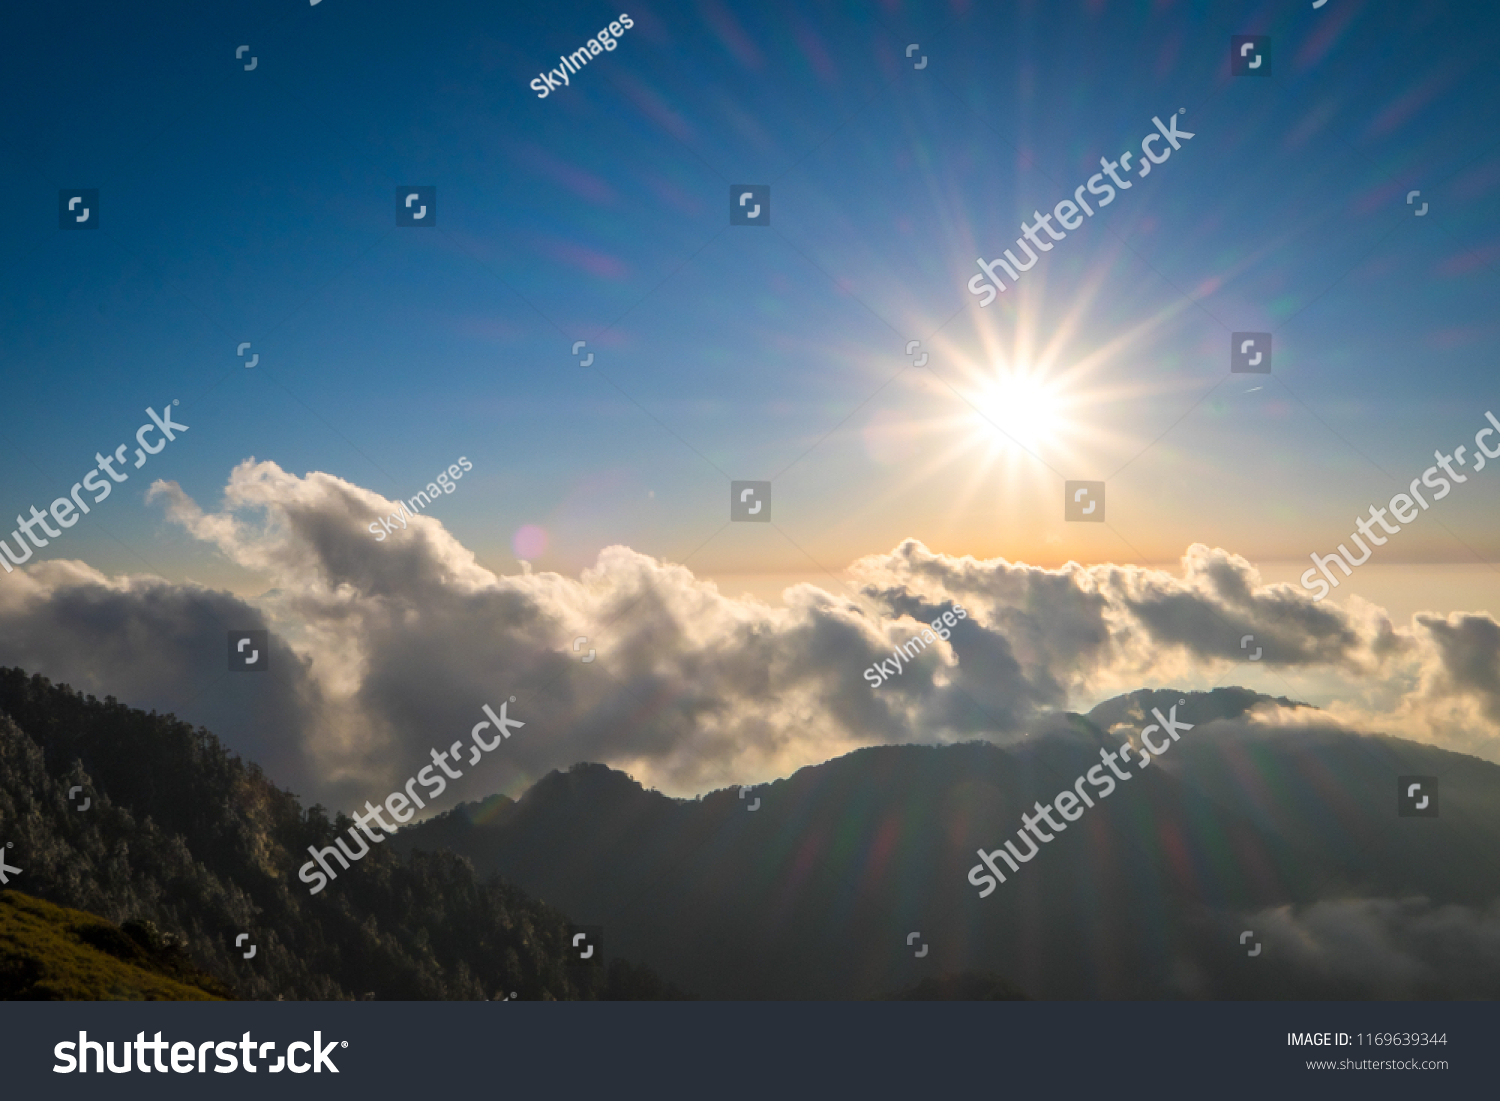 A breathtaking landscape in Taiwan. This was taken on top of a mountain. The clouds formation is vast and dramatic. The sun rises above the thick clouds. The image is calm, peaceful and magnificent. #1169639344